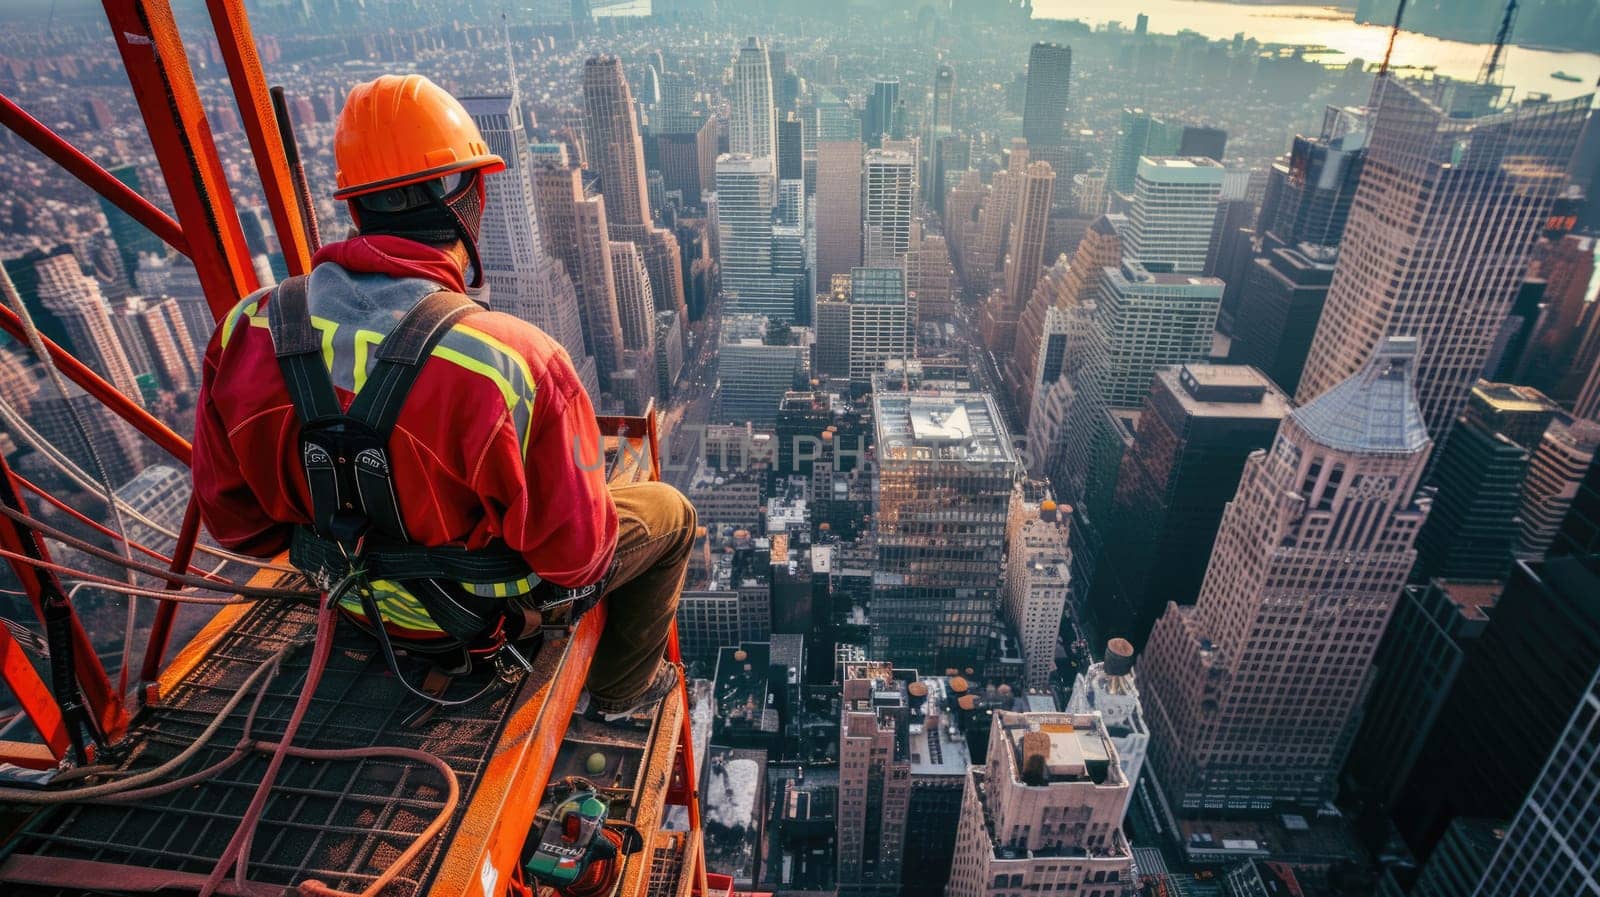 A construction worker stands atop a skyscraper, surrounded by the mesmerizing city landscape, under a cloudy sky with water glittering in the distance. AIG41